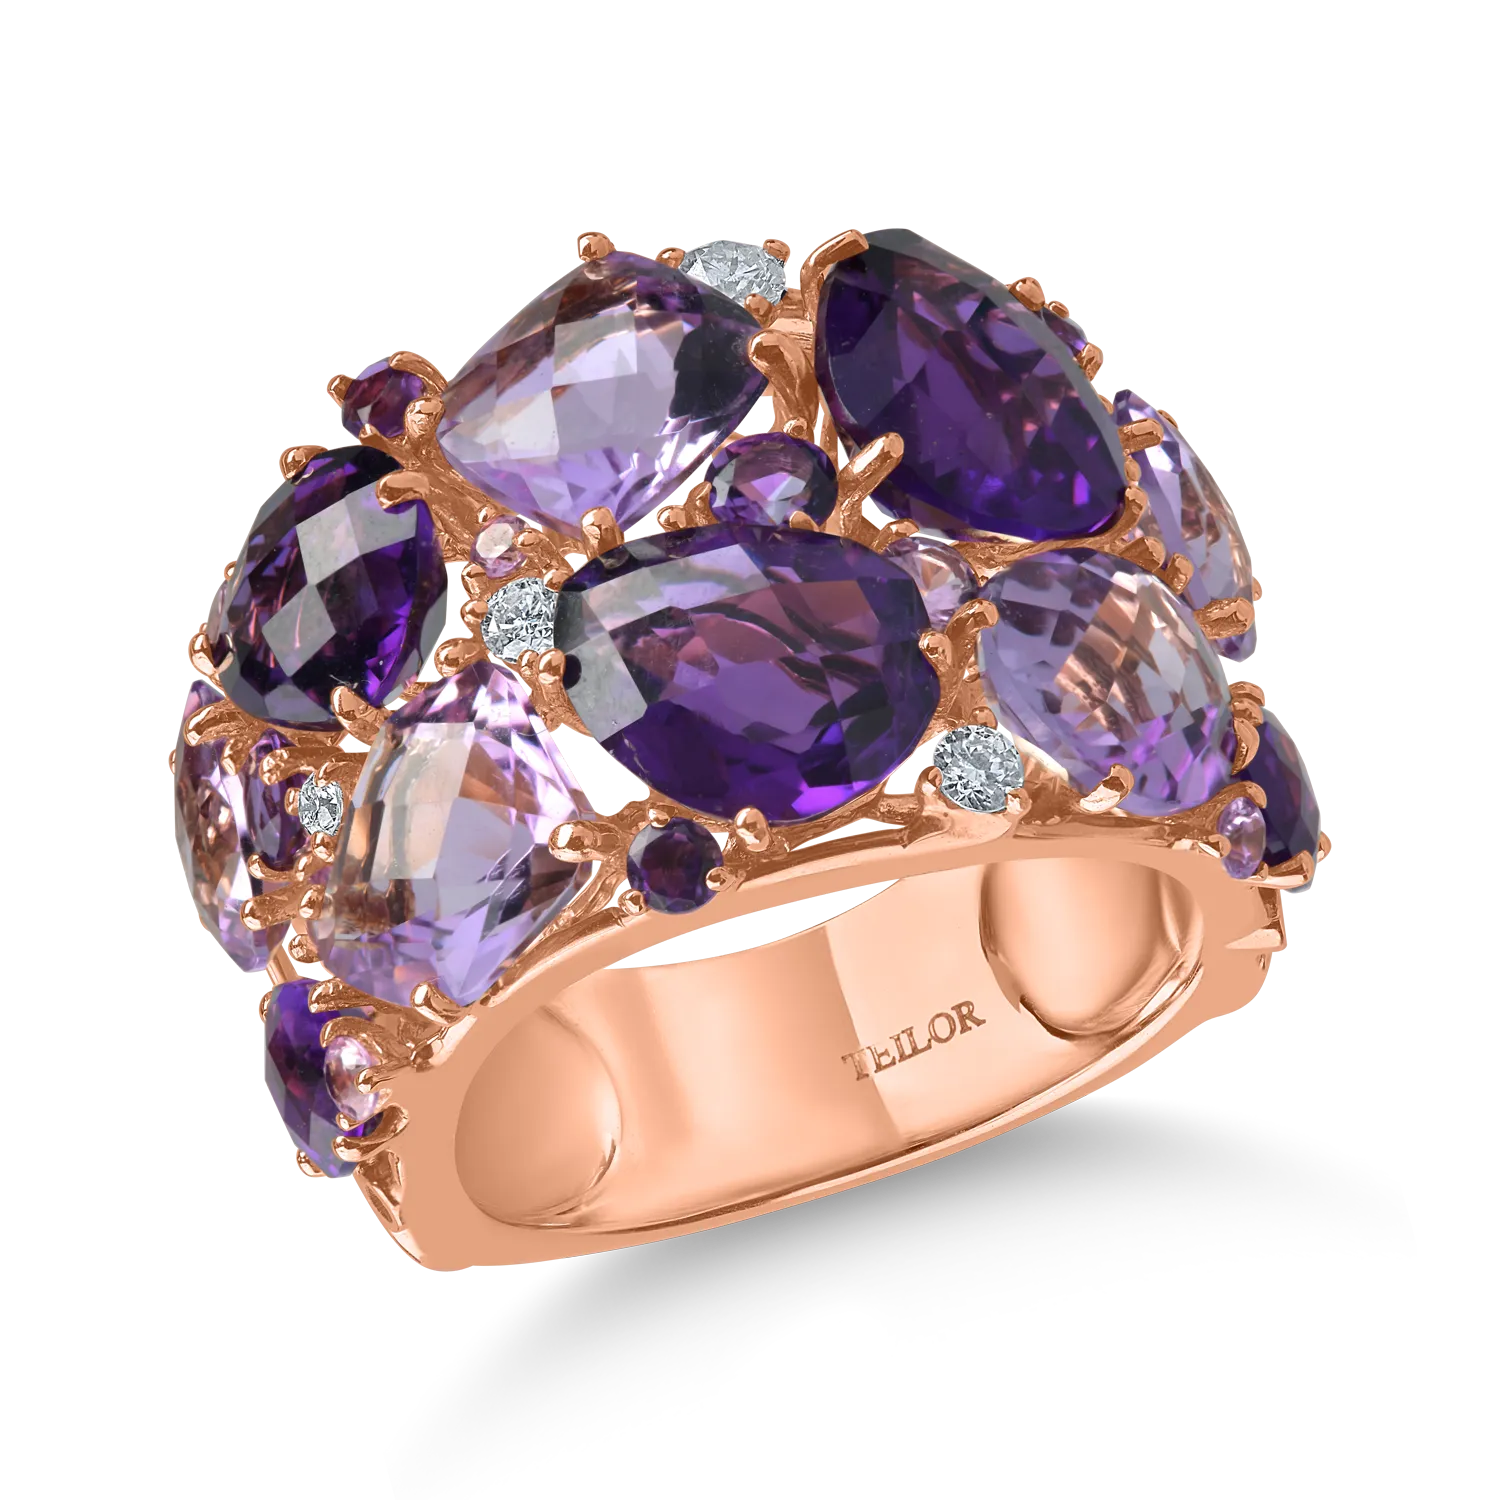 Rose gold ring with 11.1ct precious and semi-precious stones